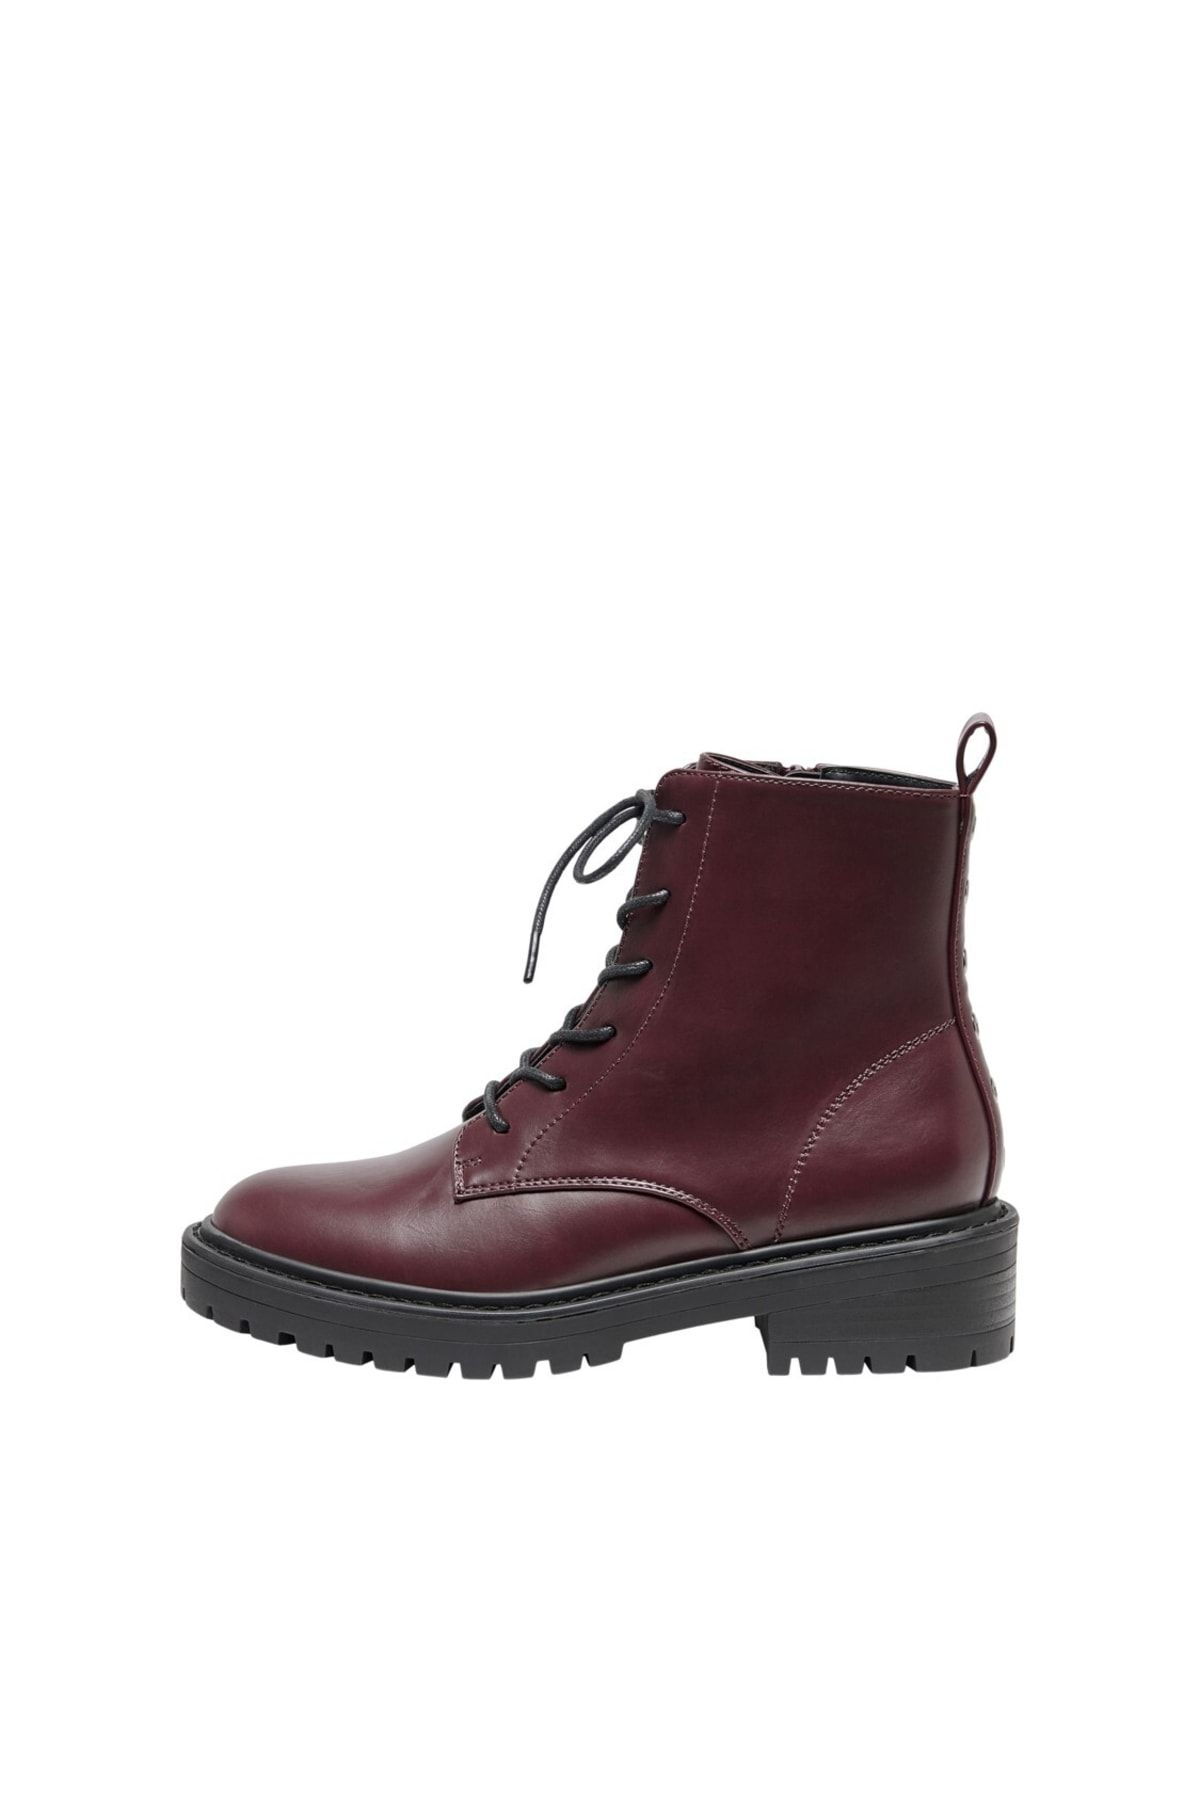 Only Onlbold-1 Pu Eyelet Lace Up Boot